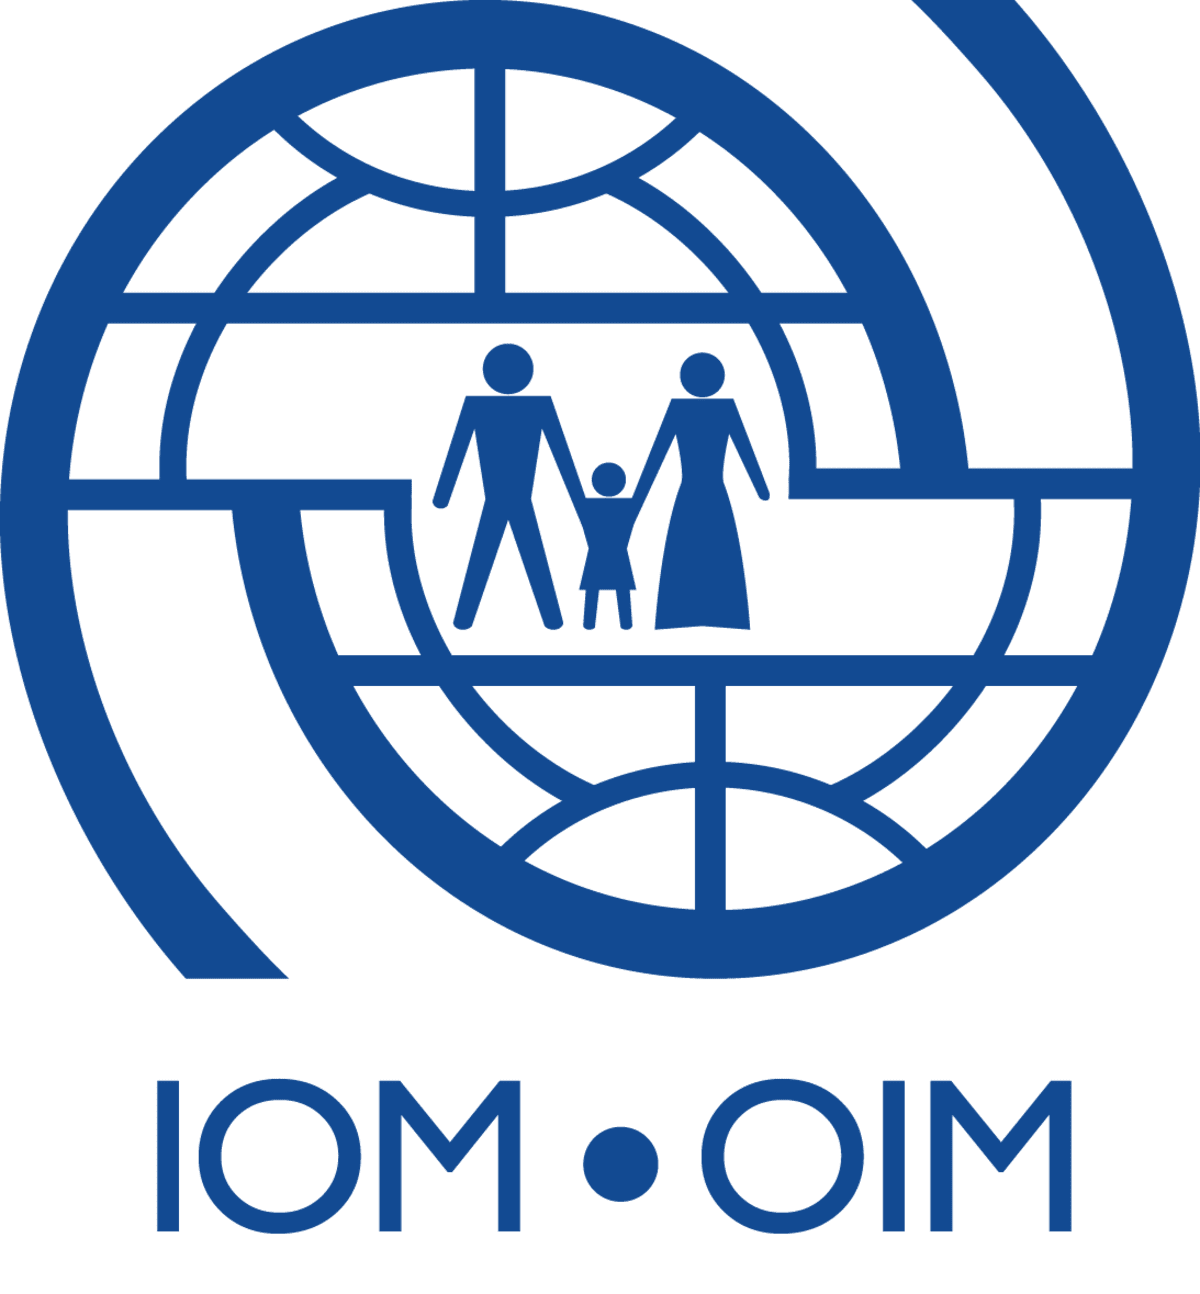 Cleaner at International Organization for Migration 2022, International Organization for Migration Jobs in Tanzania 2022, iom recruitment process, iom vacancies in maiduguri, iom status check, international organization for migration payment, iom account, iom search, how to apply for iom